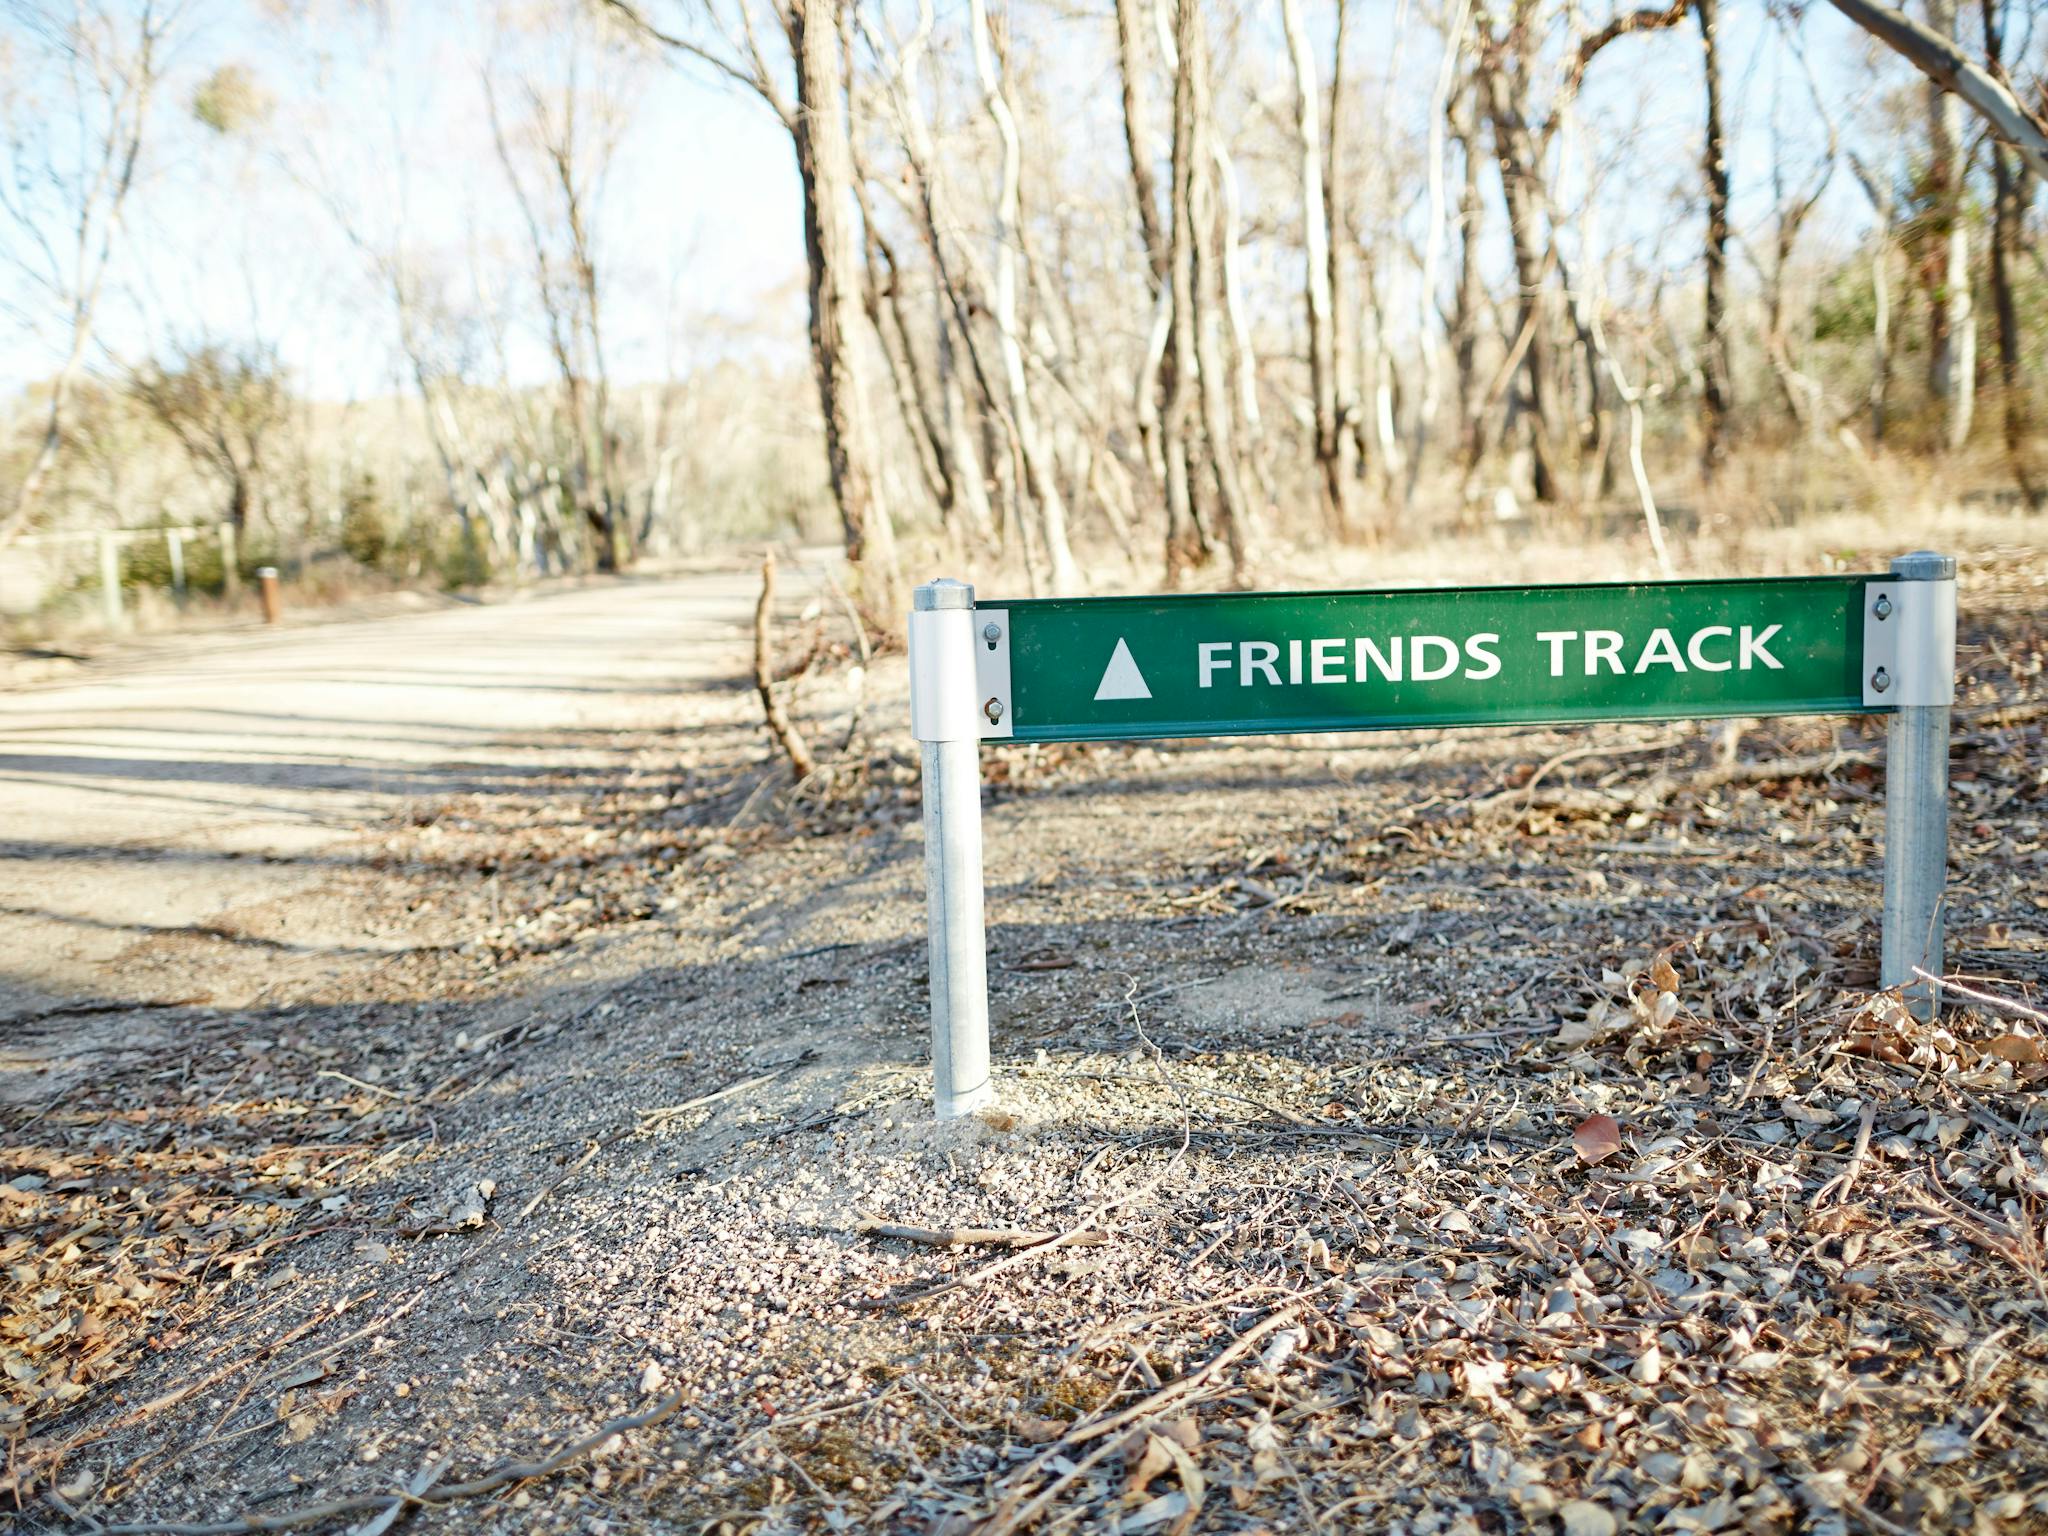 Green directional sign to Friends Track, dirt road, dried leaves, gum trees in background